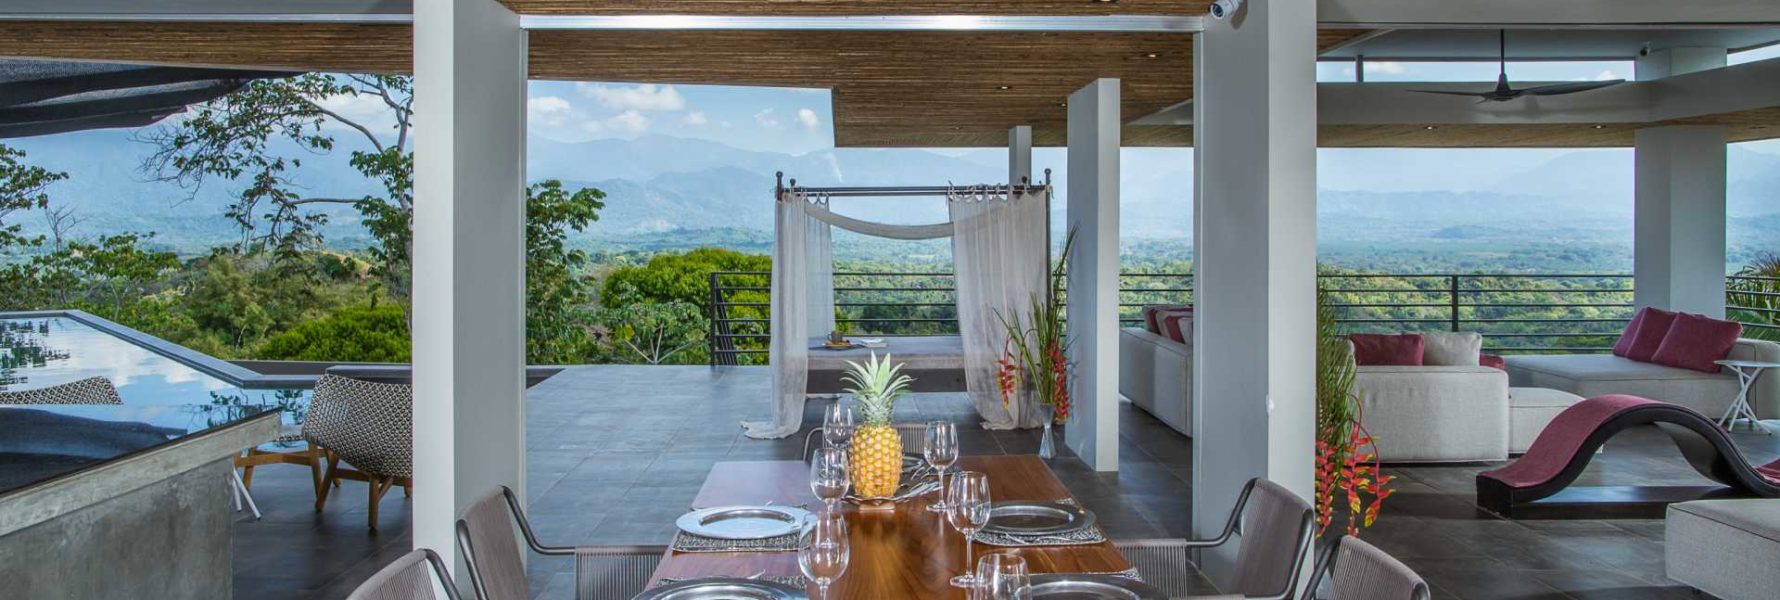 Enjoy a gourmet meal prepared by your private chef and the incredible views at this beautiful dining table. 